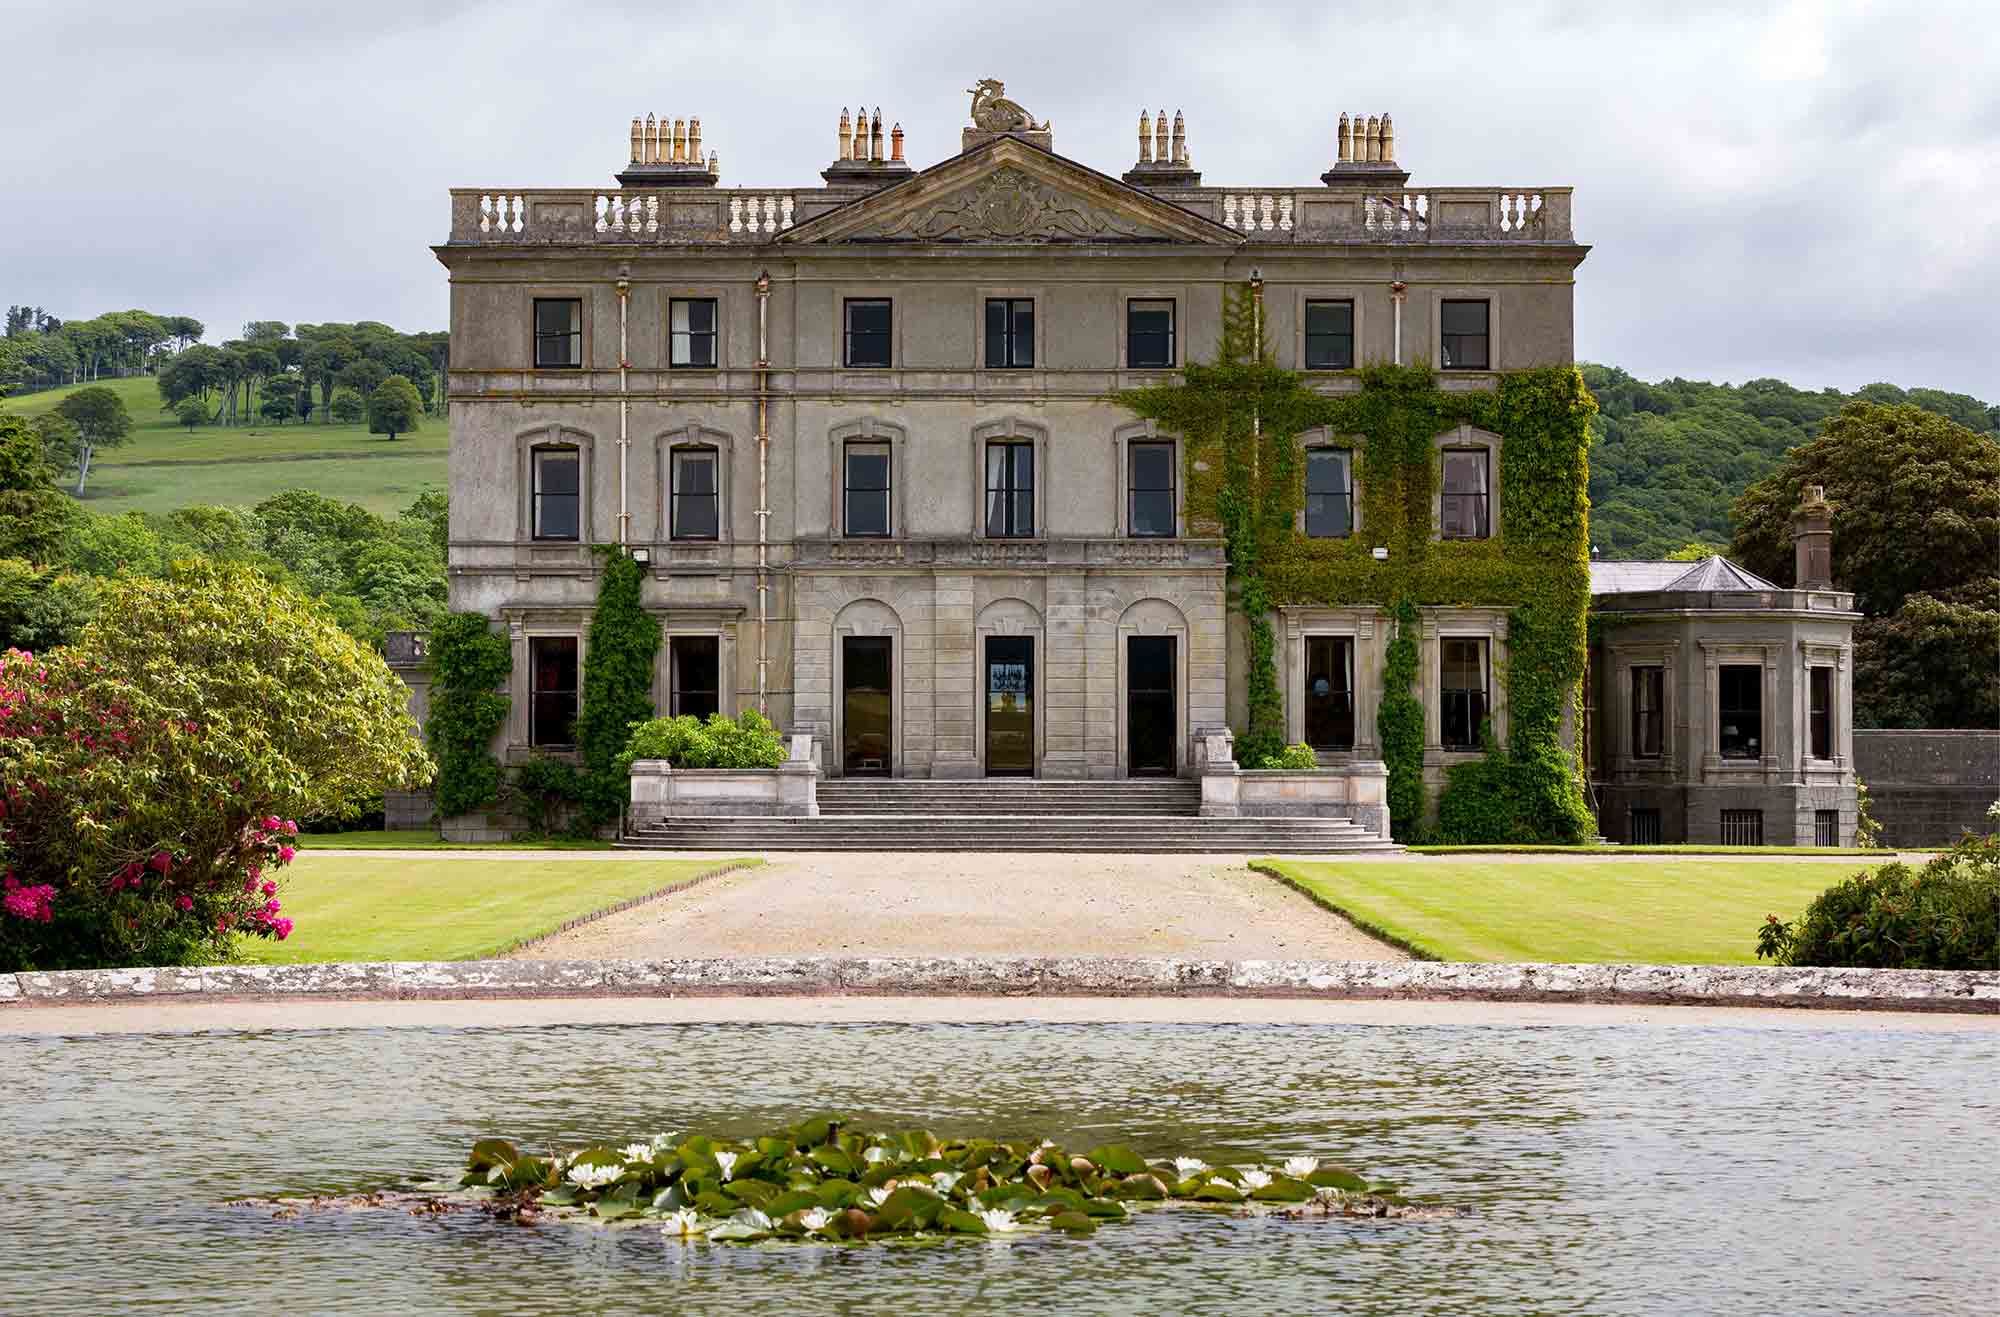 Visit Curraghmore House & Gardens and enjoy an unforgetable experience in Waterford County